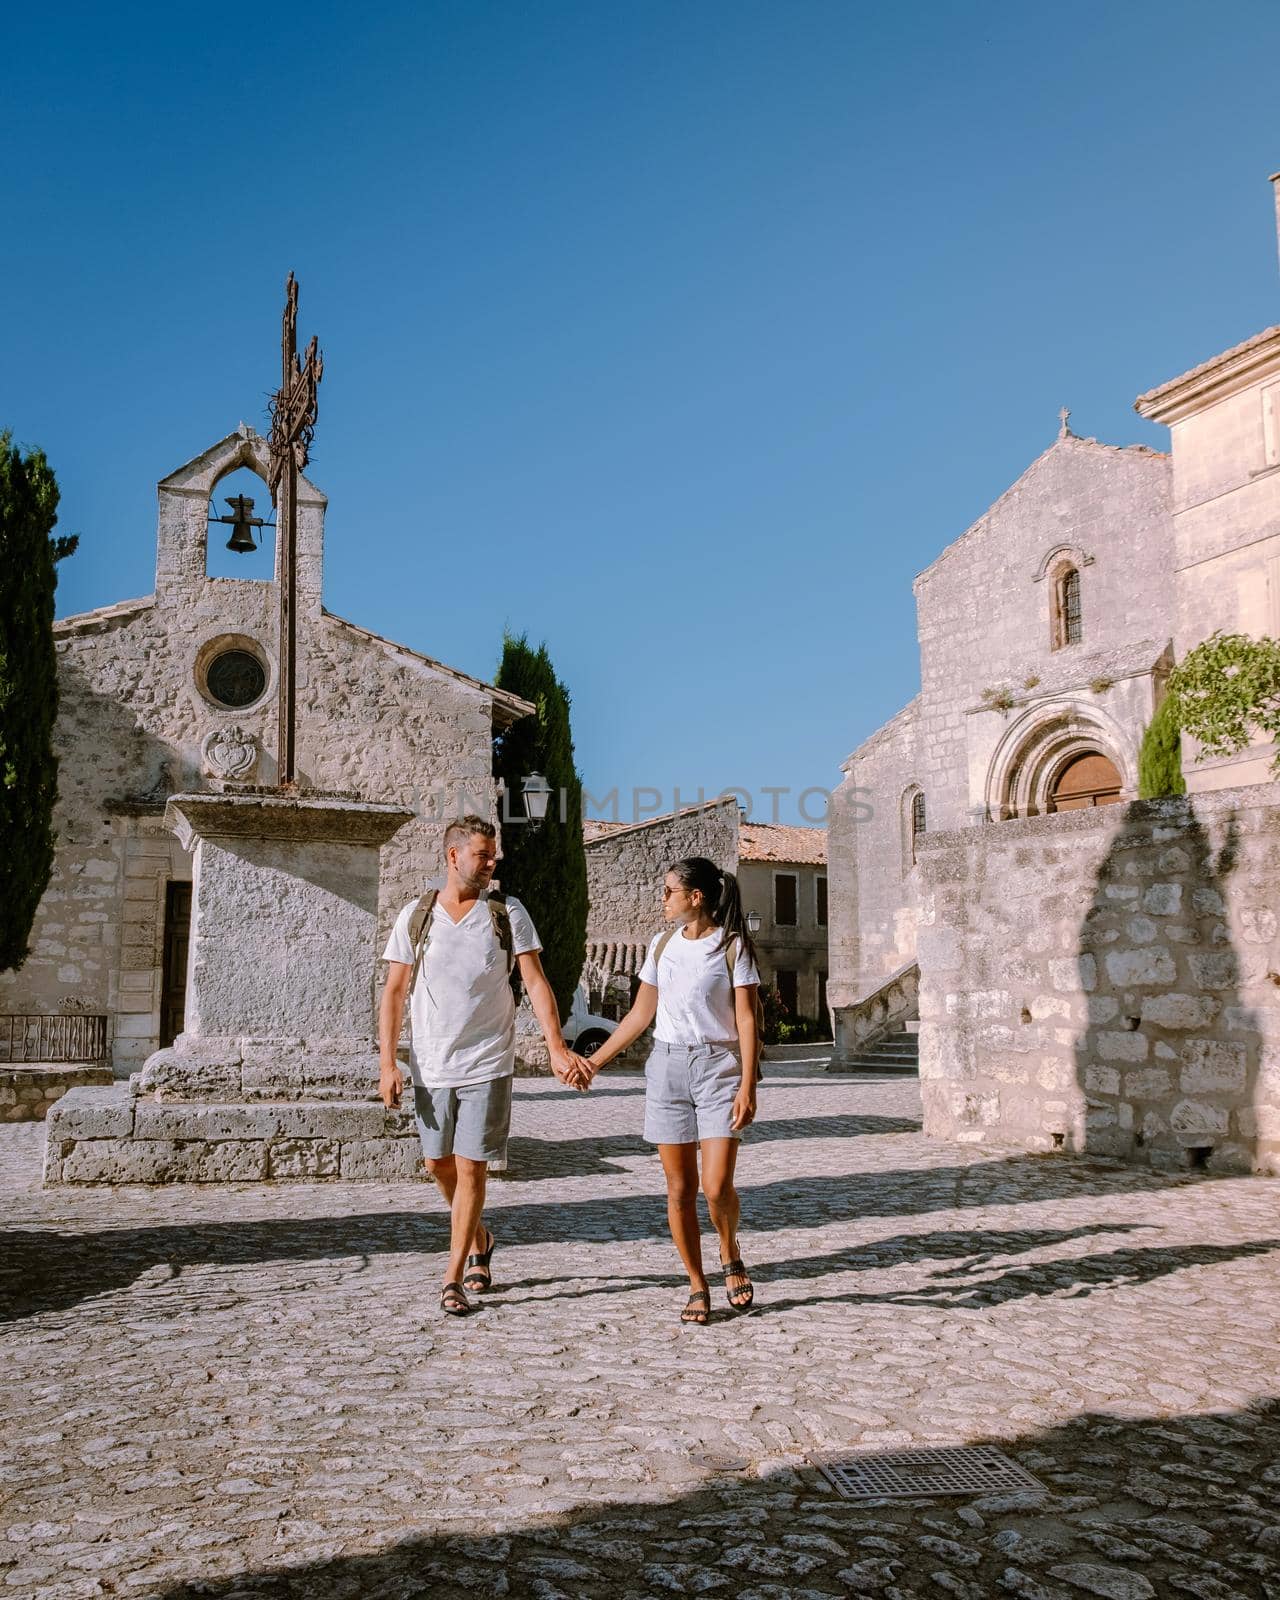 couple visit the town of Les Baux de Provence France, old historical village build on a hill in the Provence, Les Baux de Provence village on the rock formation and its castle. France, Europe by fokkebok